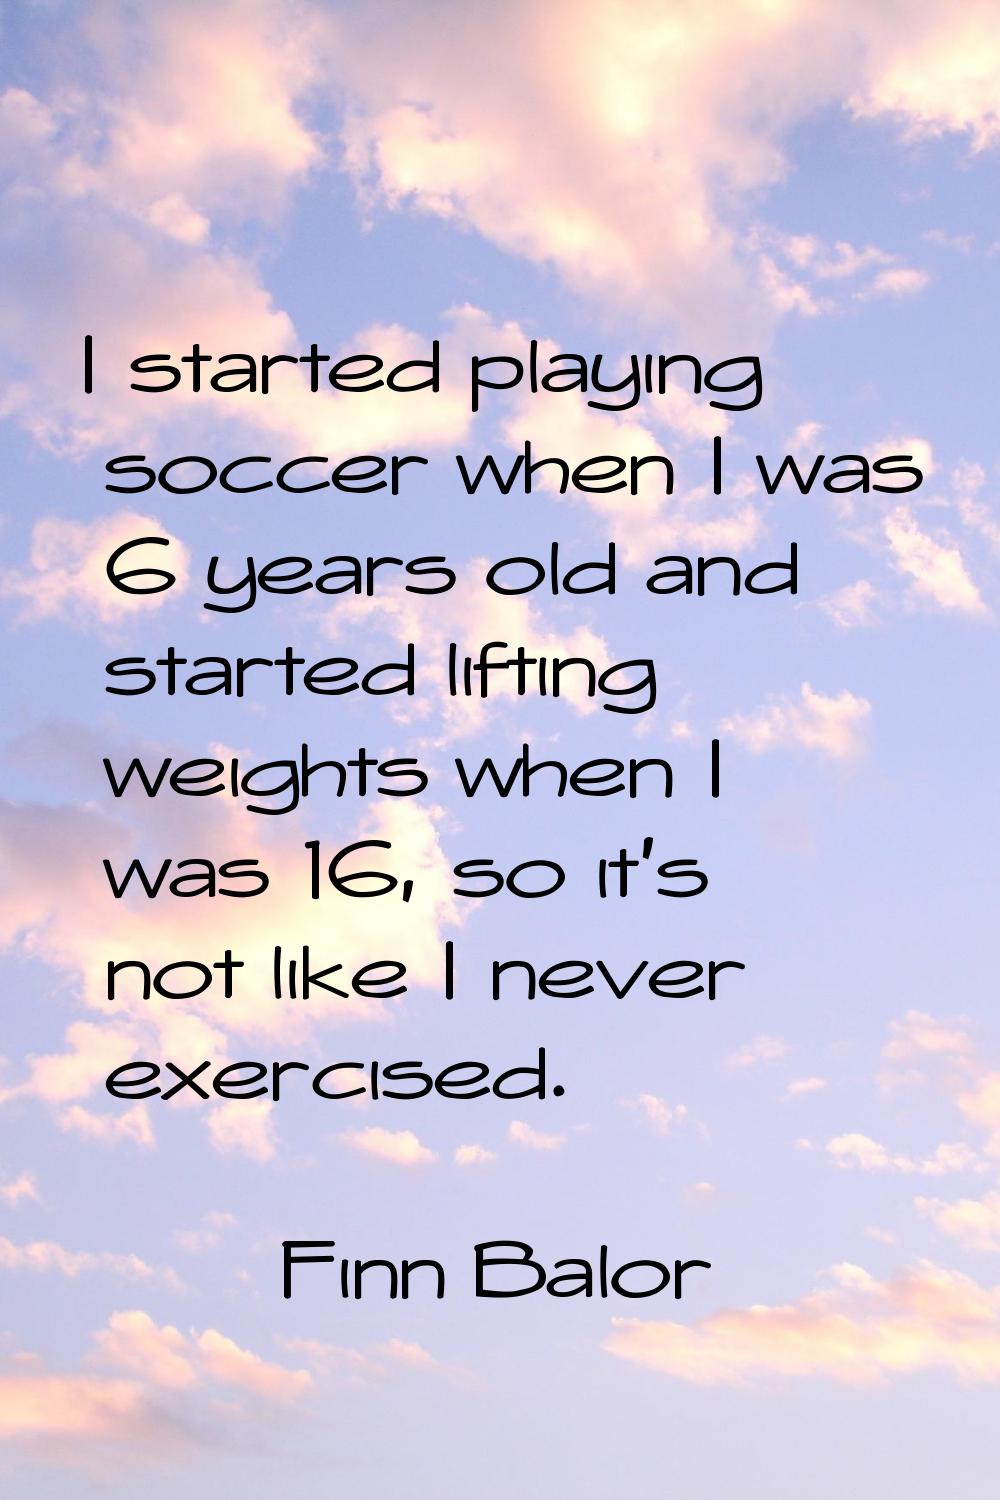 I started playing soccer when I was 6 years old and started lifting weights when I was 16, so it's 